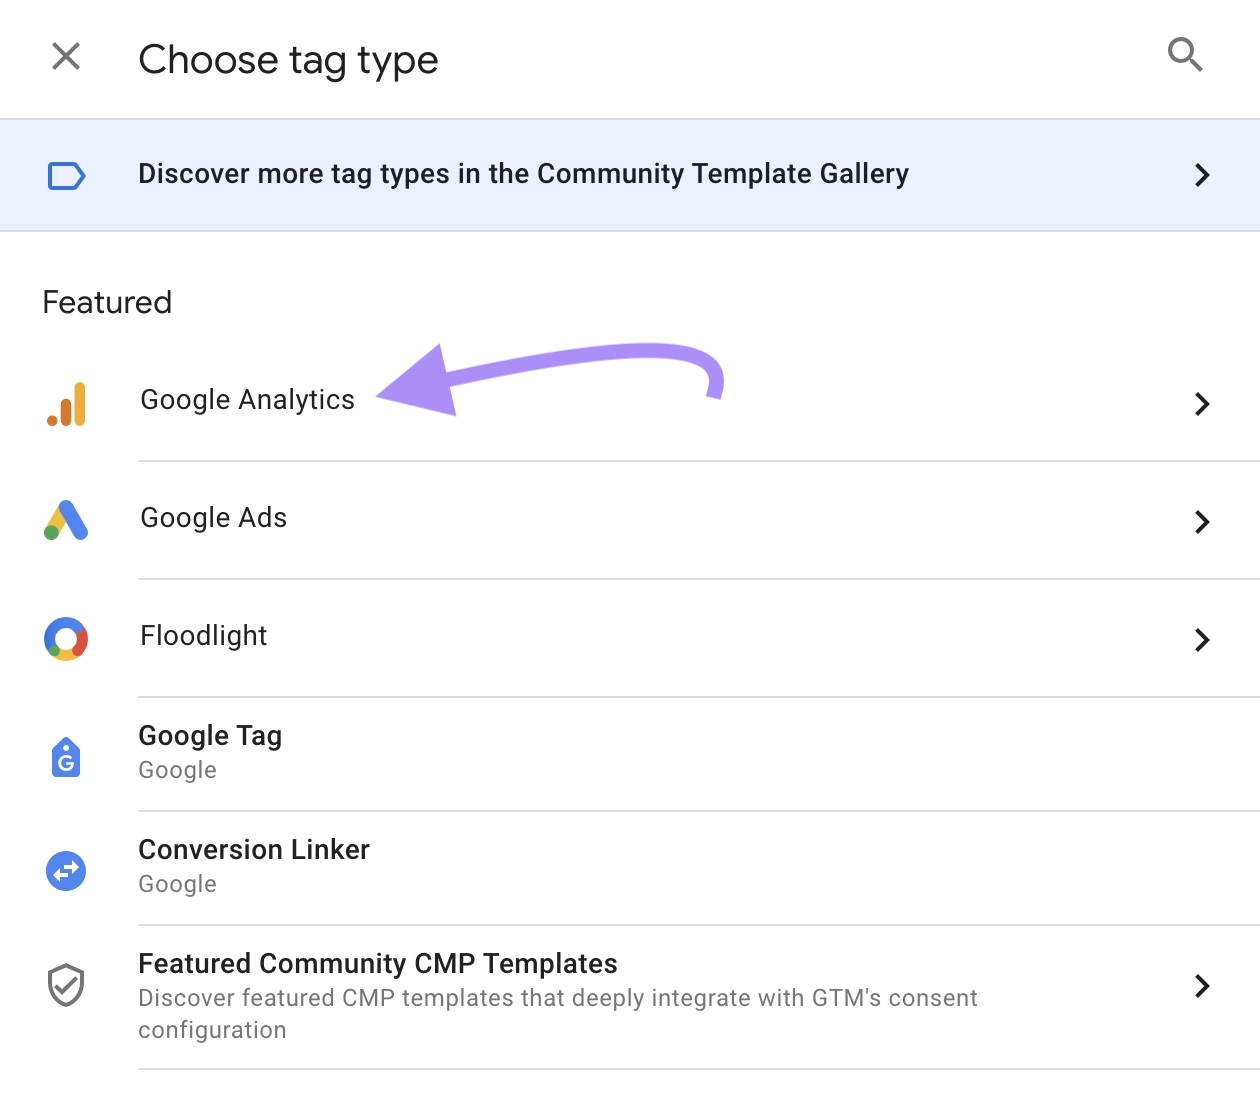 "Google Analytics" selected under "Choose tag type"